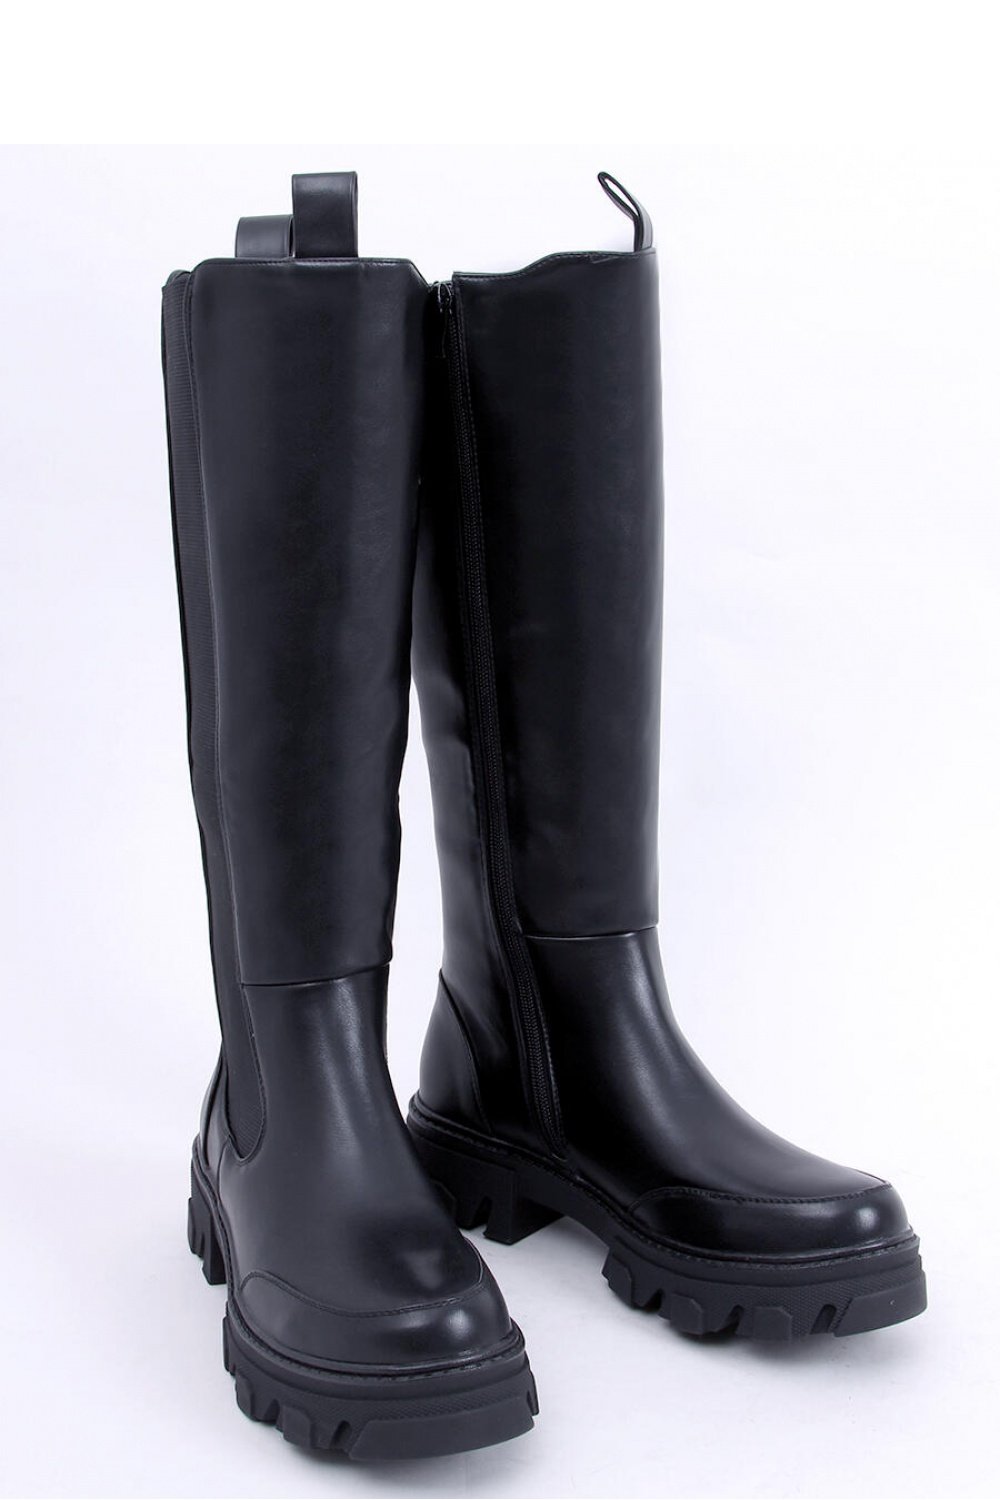 Officer boots model 174079 Inello Posh Styles Apparel